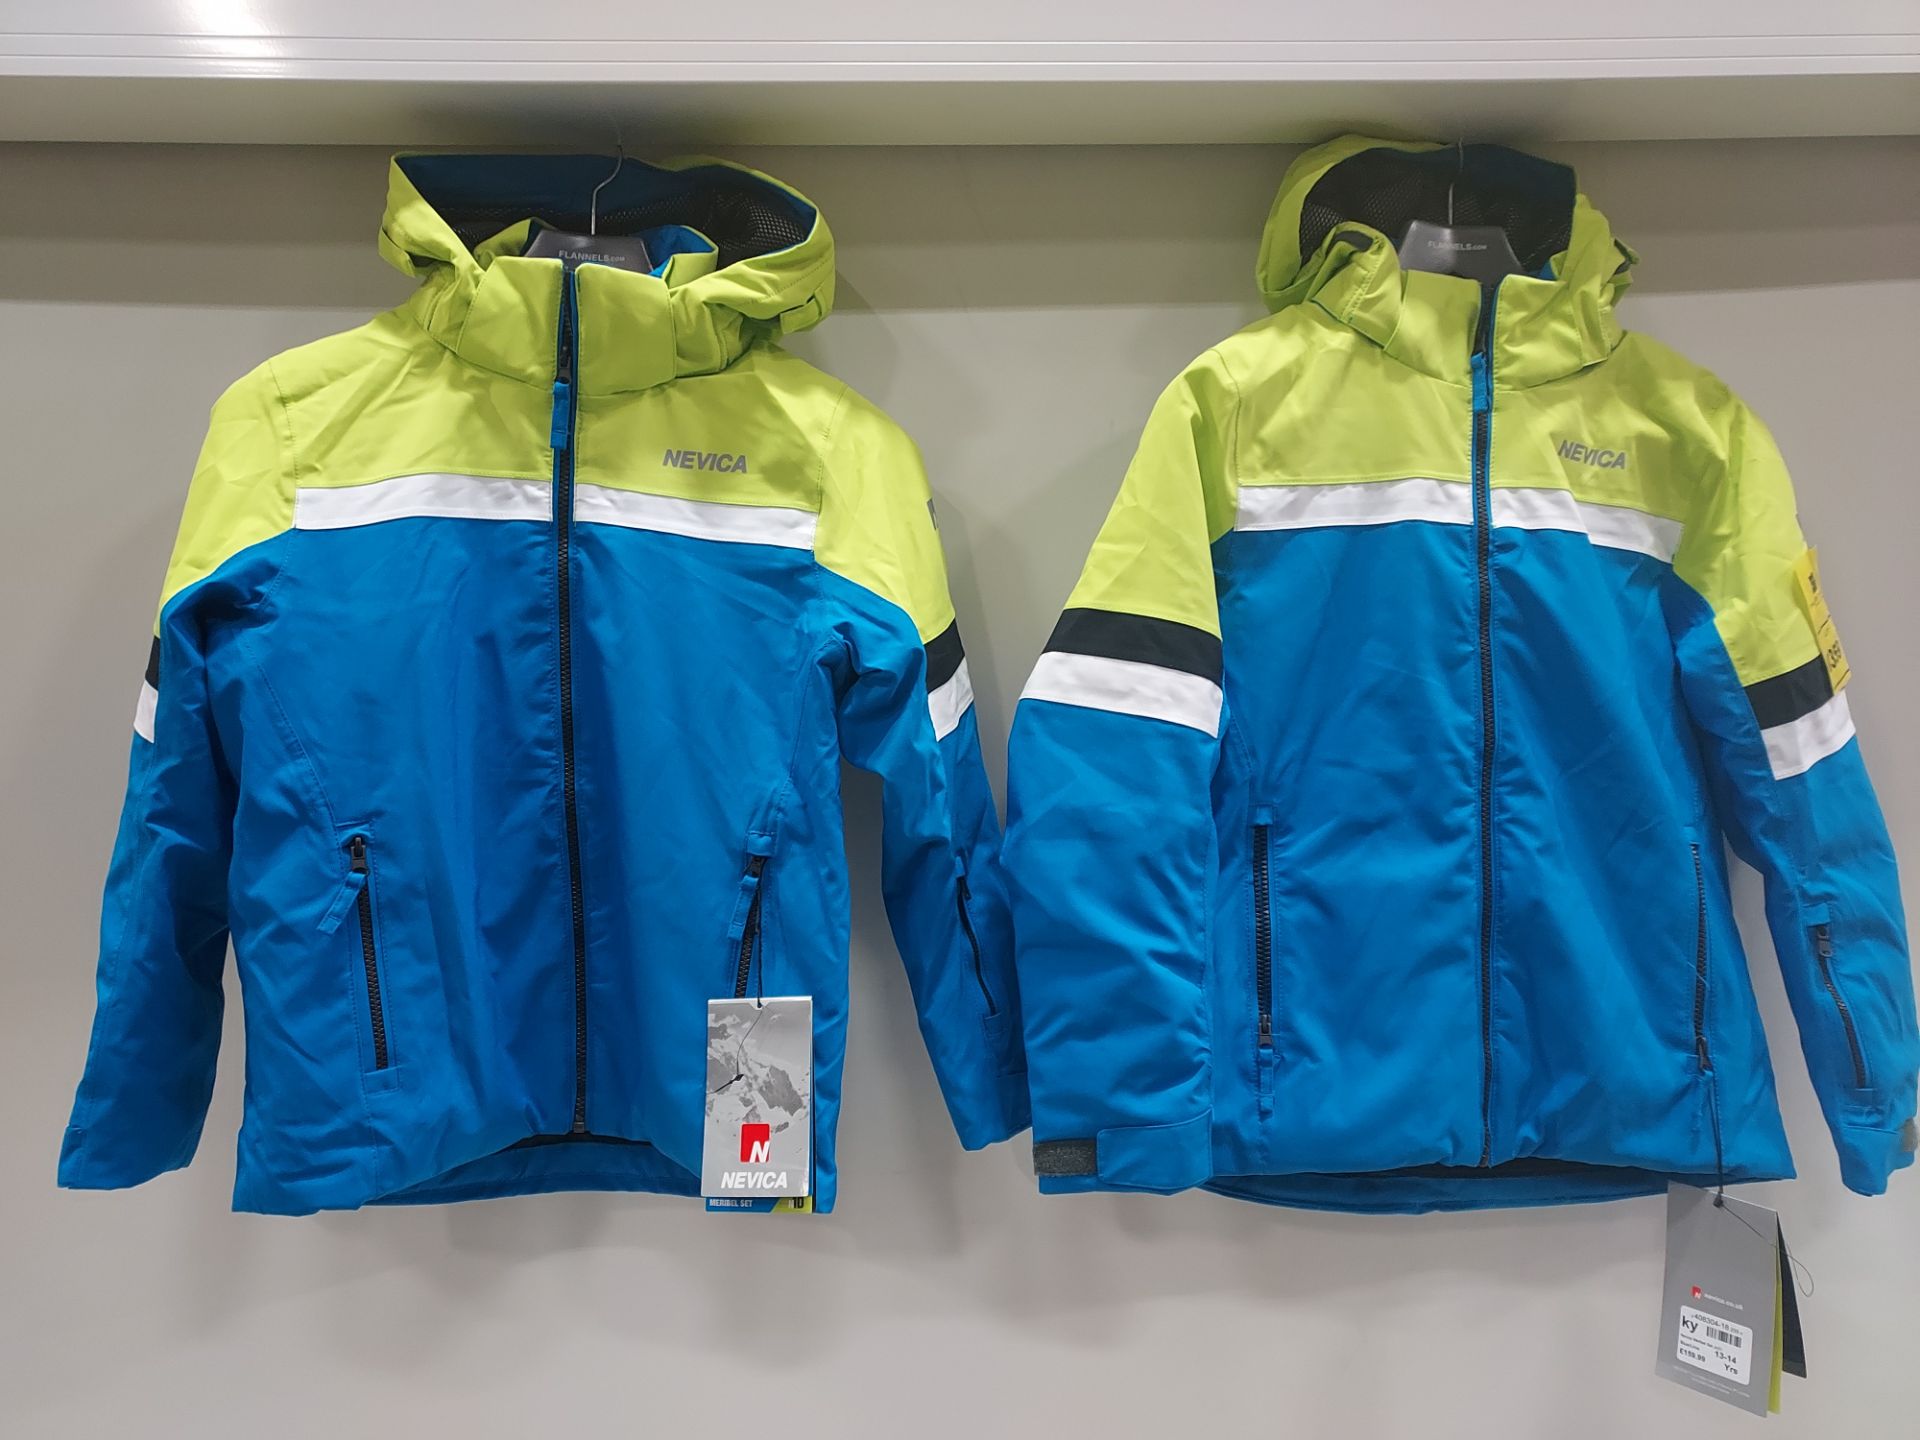 2 X BRAND NEW NEVICA MERIBEL BLUE / LIME WINTER JACKET IN SIZES 8-9 YEARS AND 10-11 YEARS RRP £159.